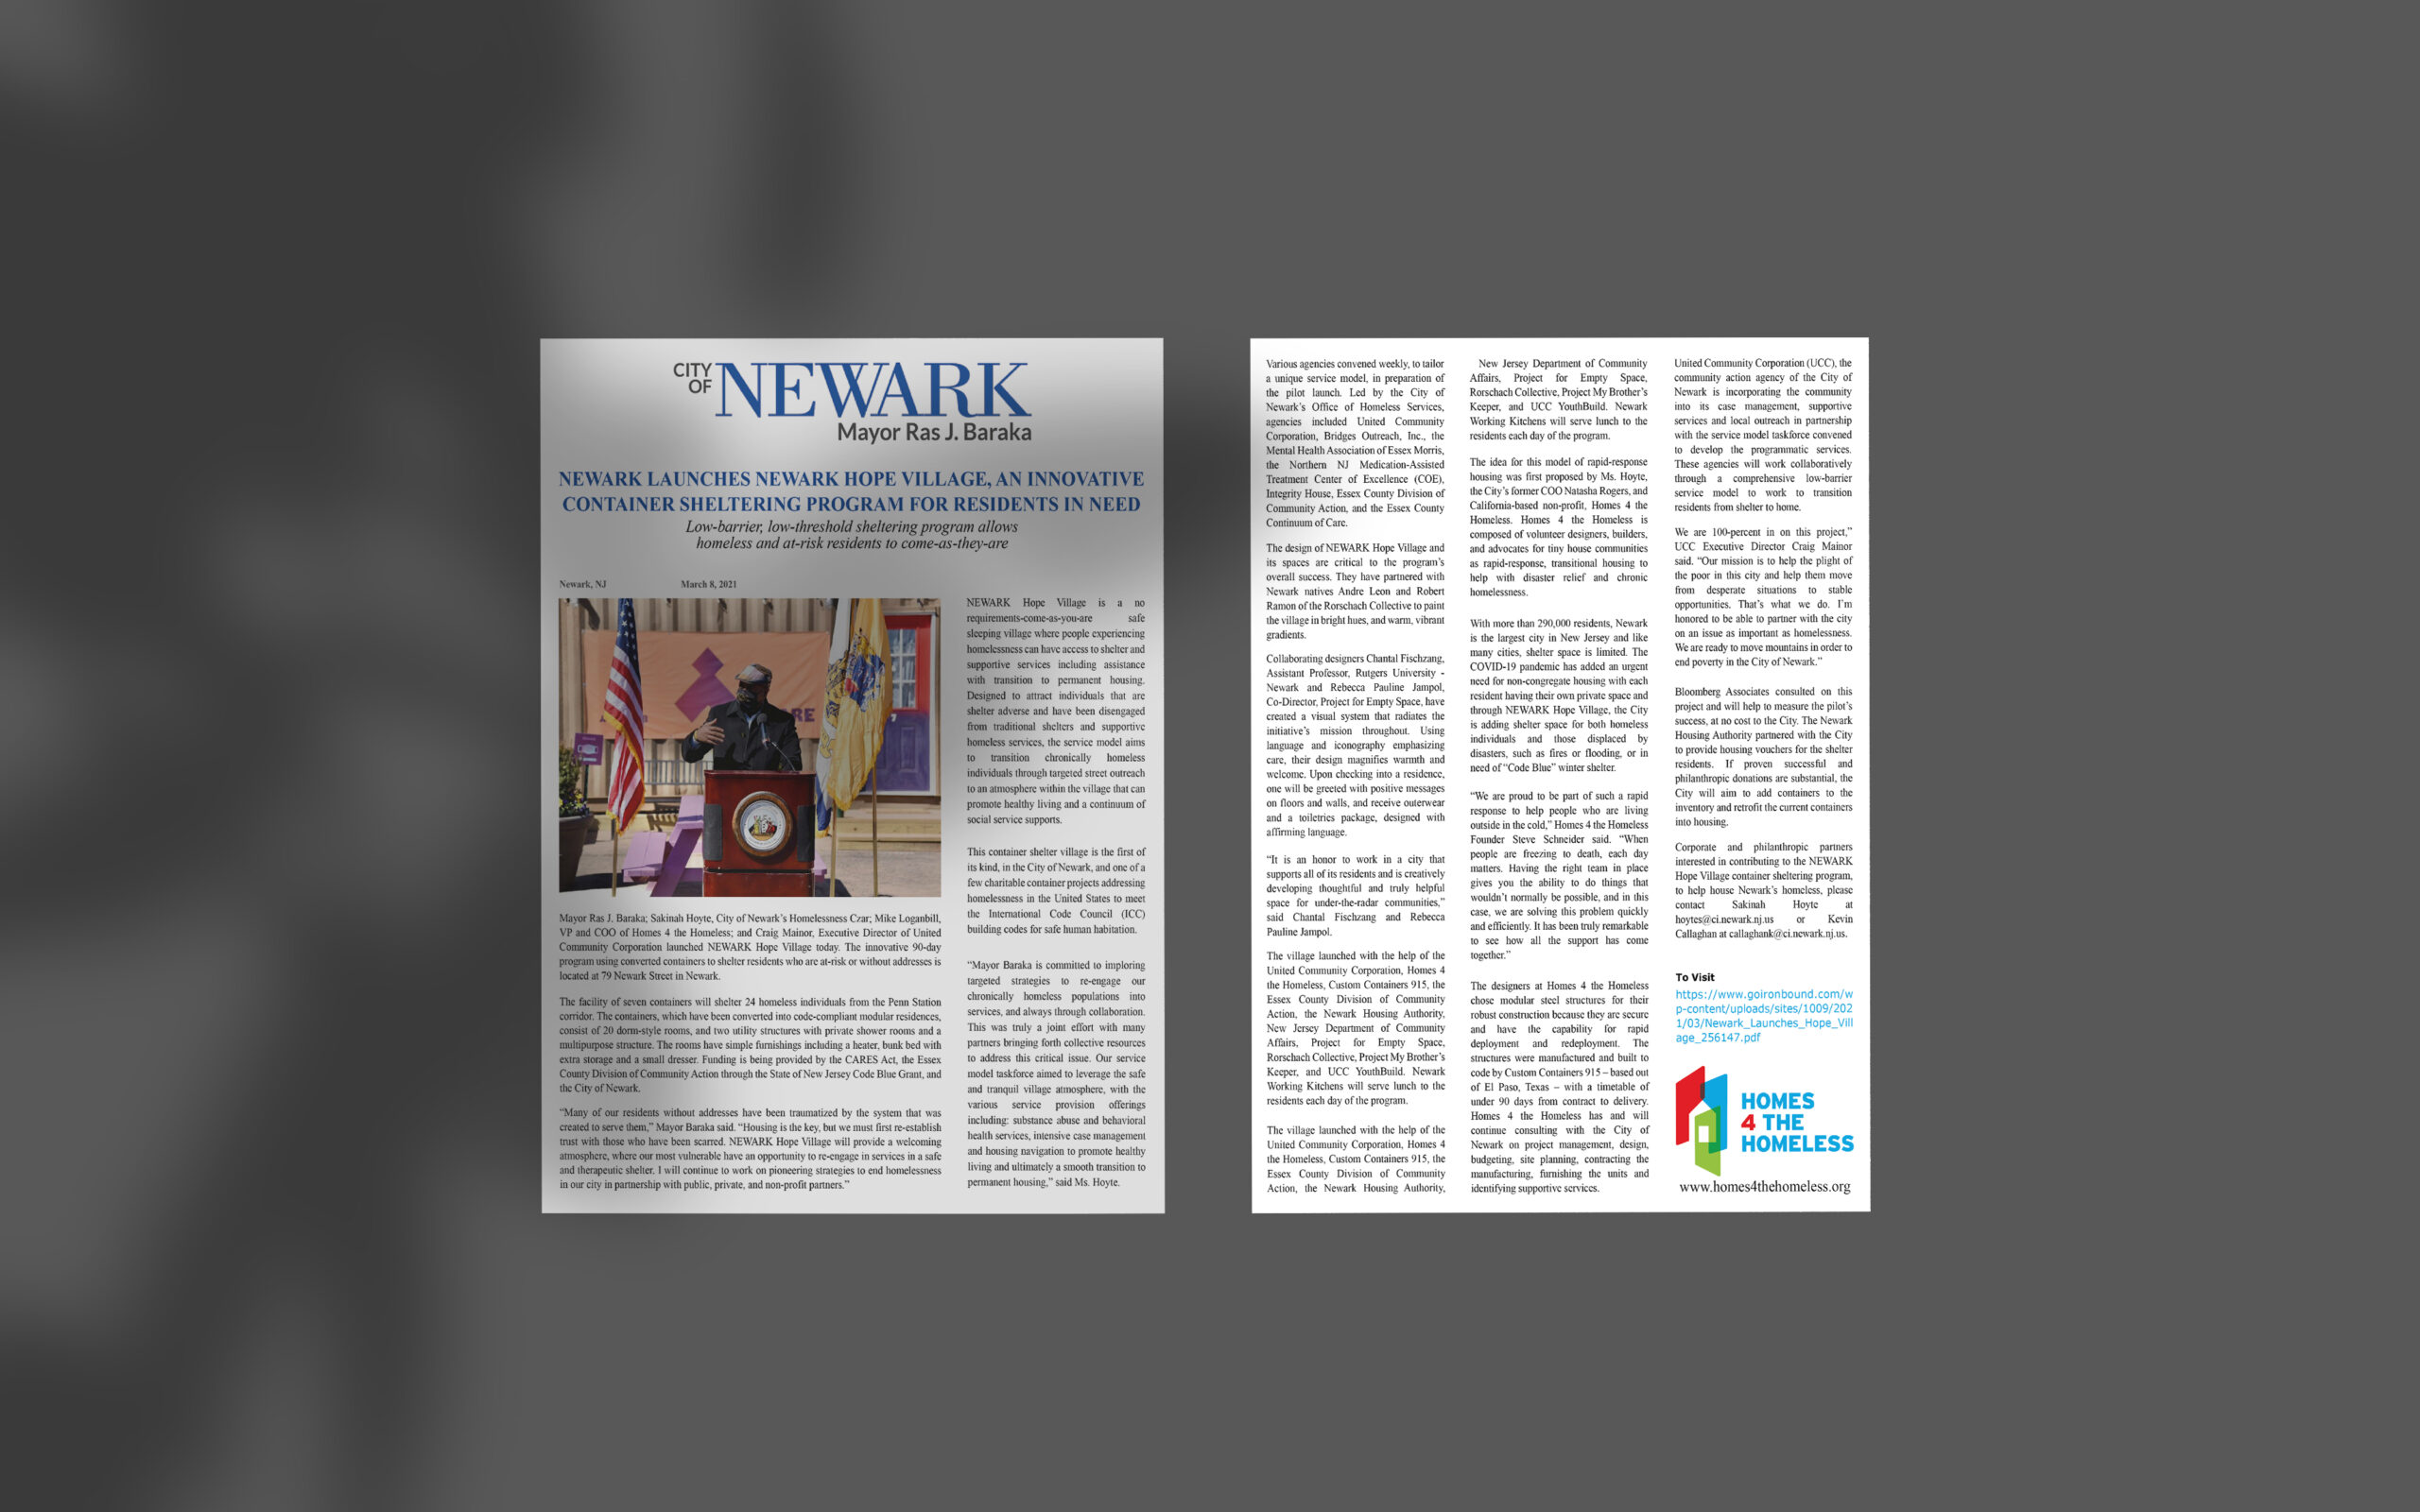 City of Newark, New Jersey Press Release March 8, 2021